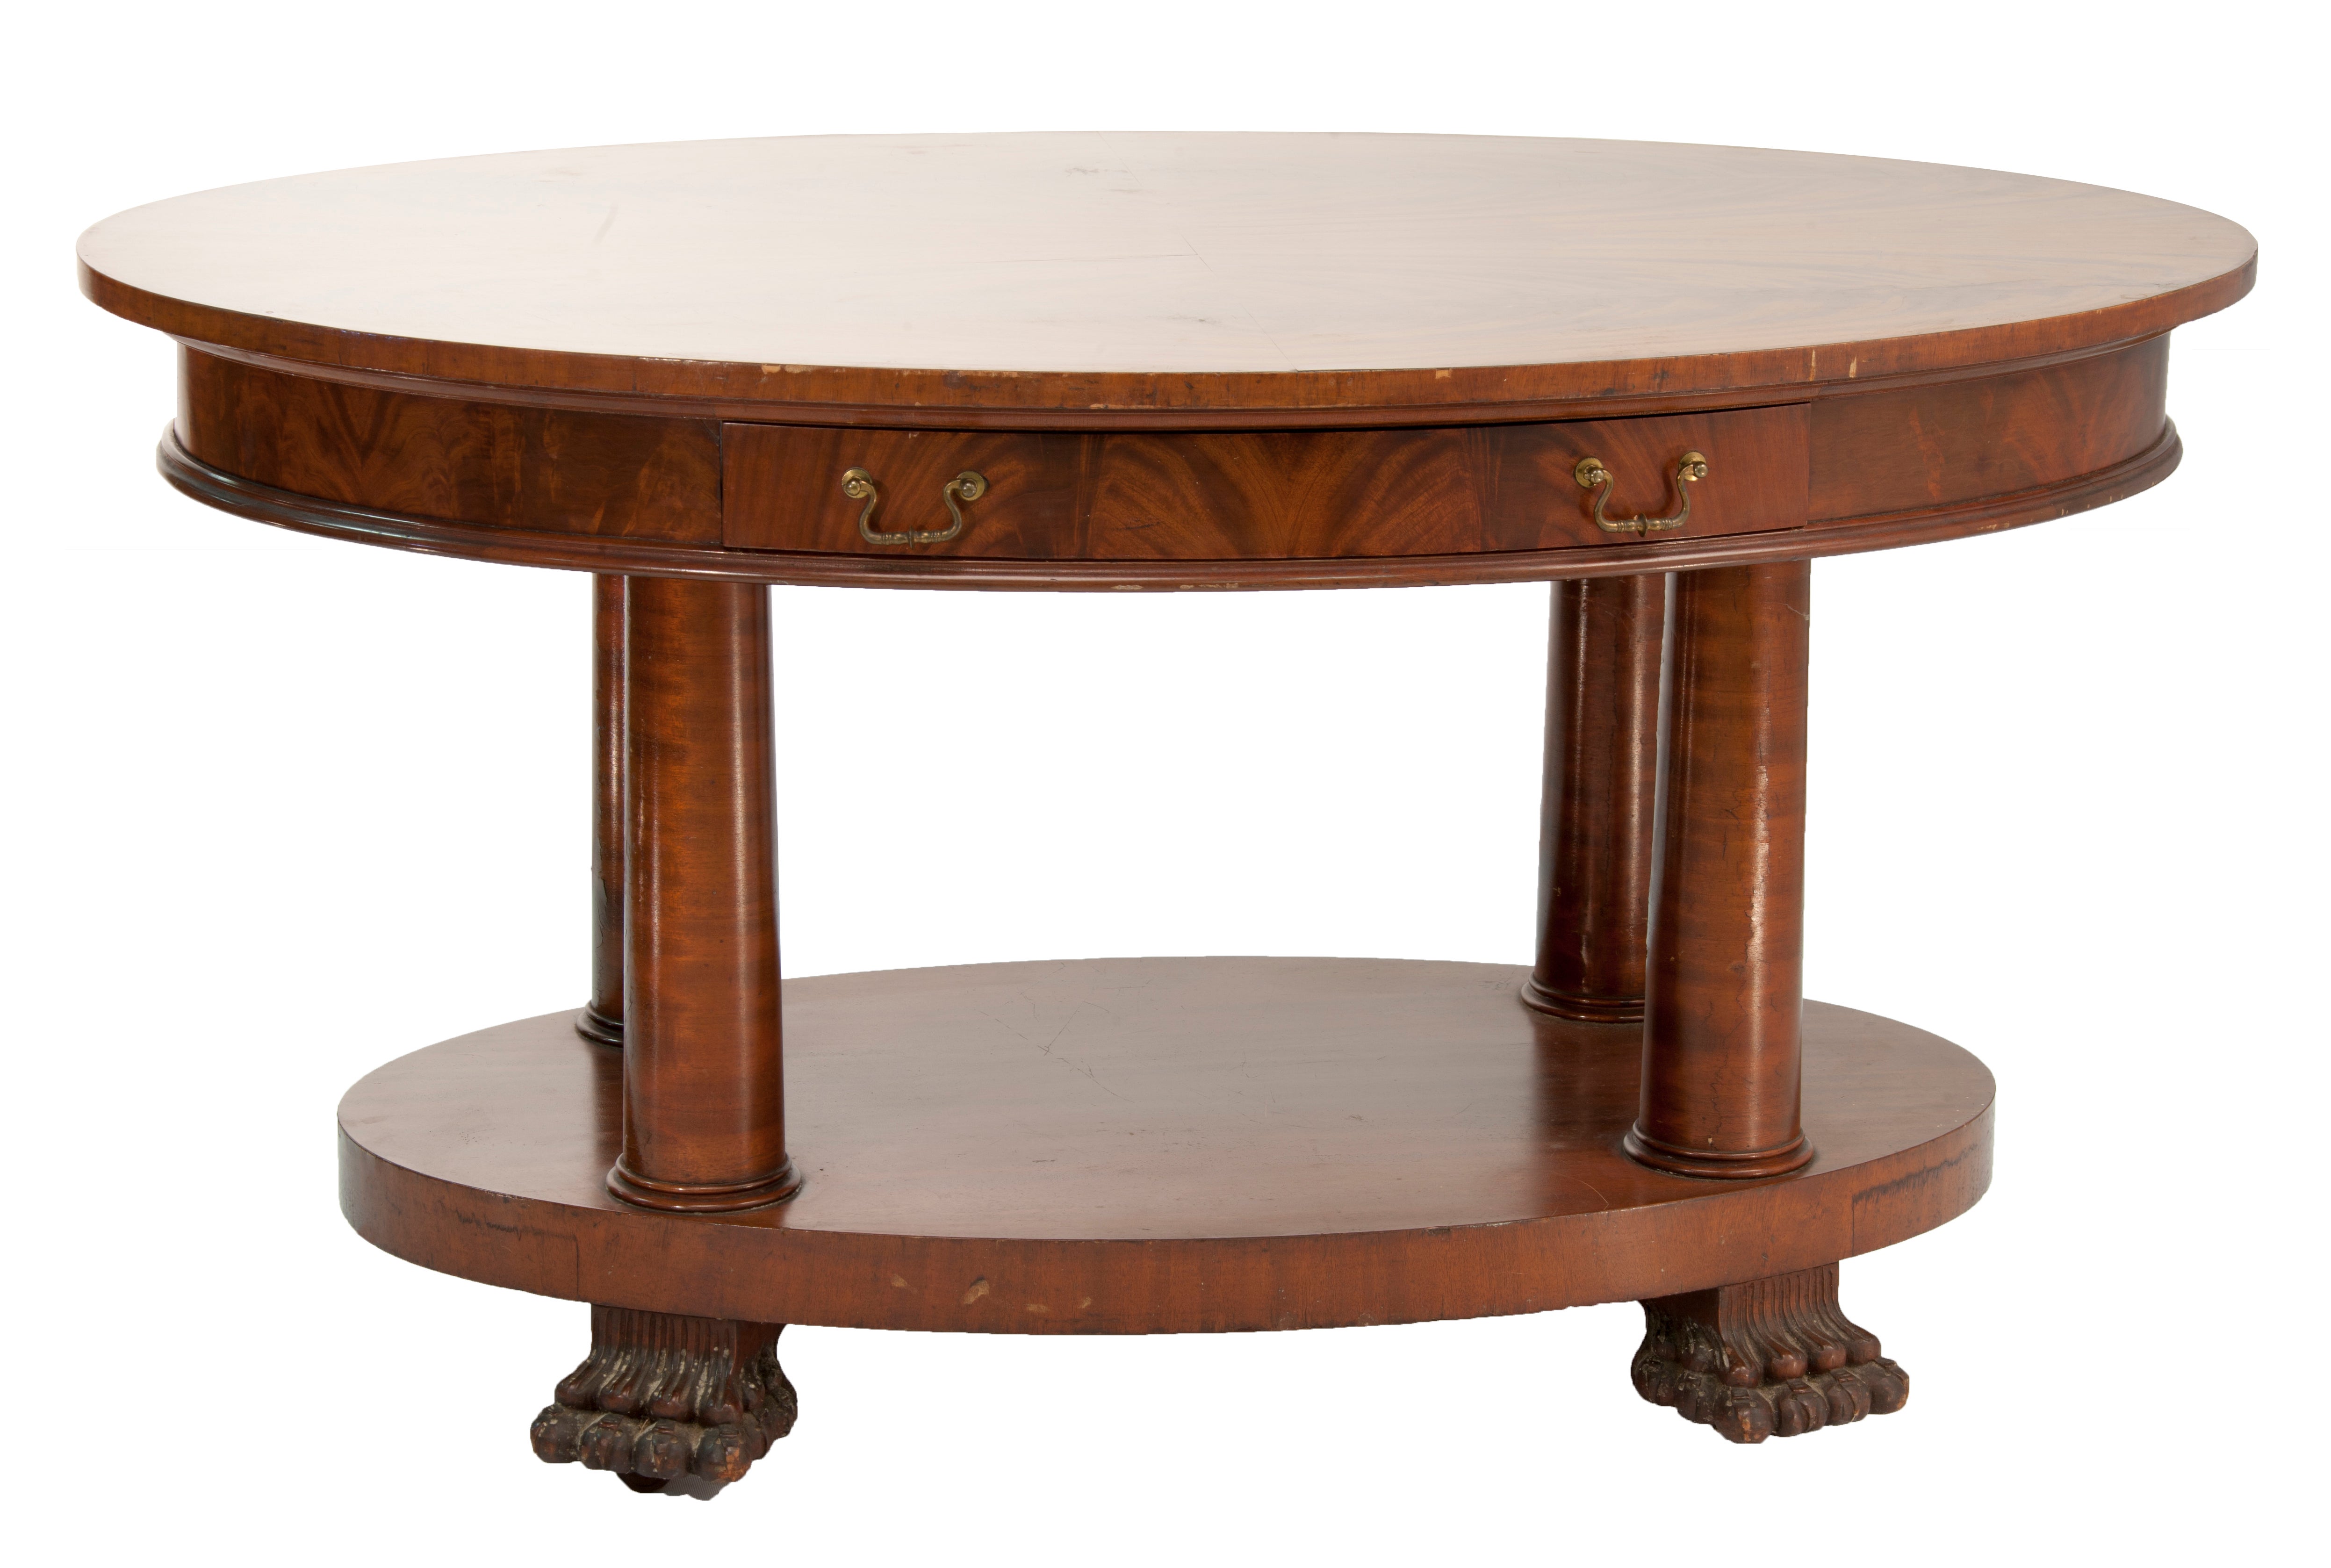 Empire Oval Table with Claw Feet and Rounded Drawers